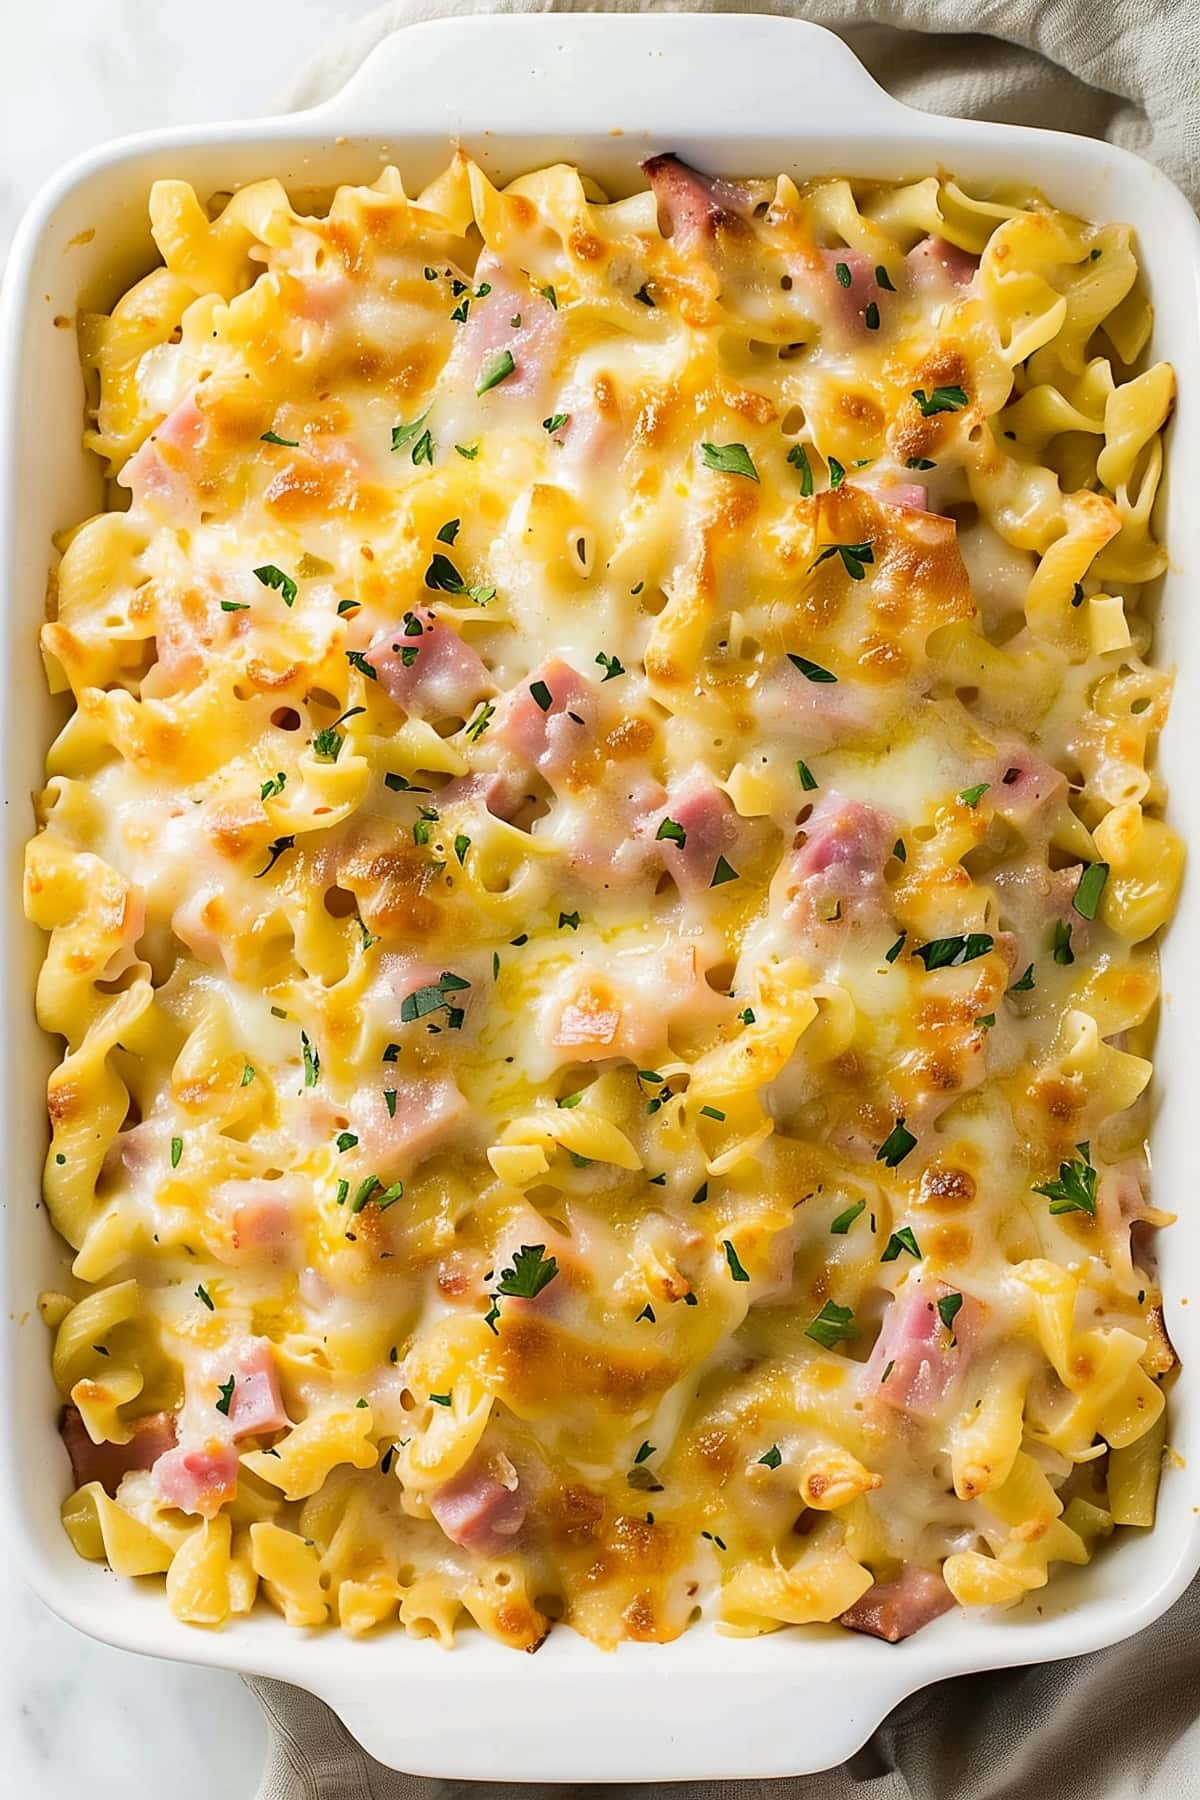 Cheesy homemade ham and noodle casserole in a 9x13 white baking dish.